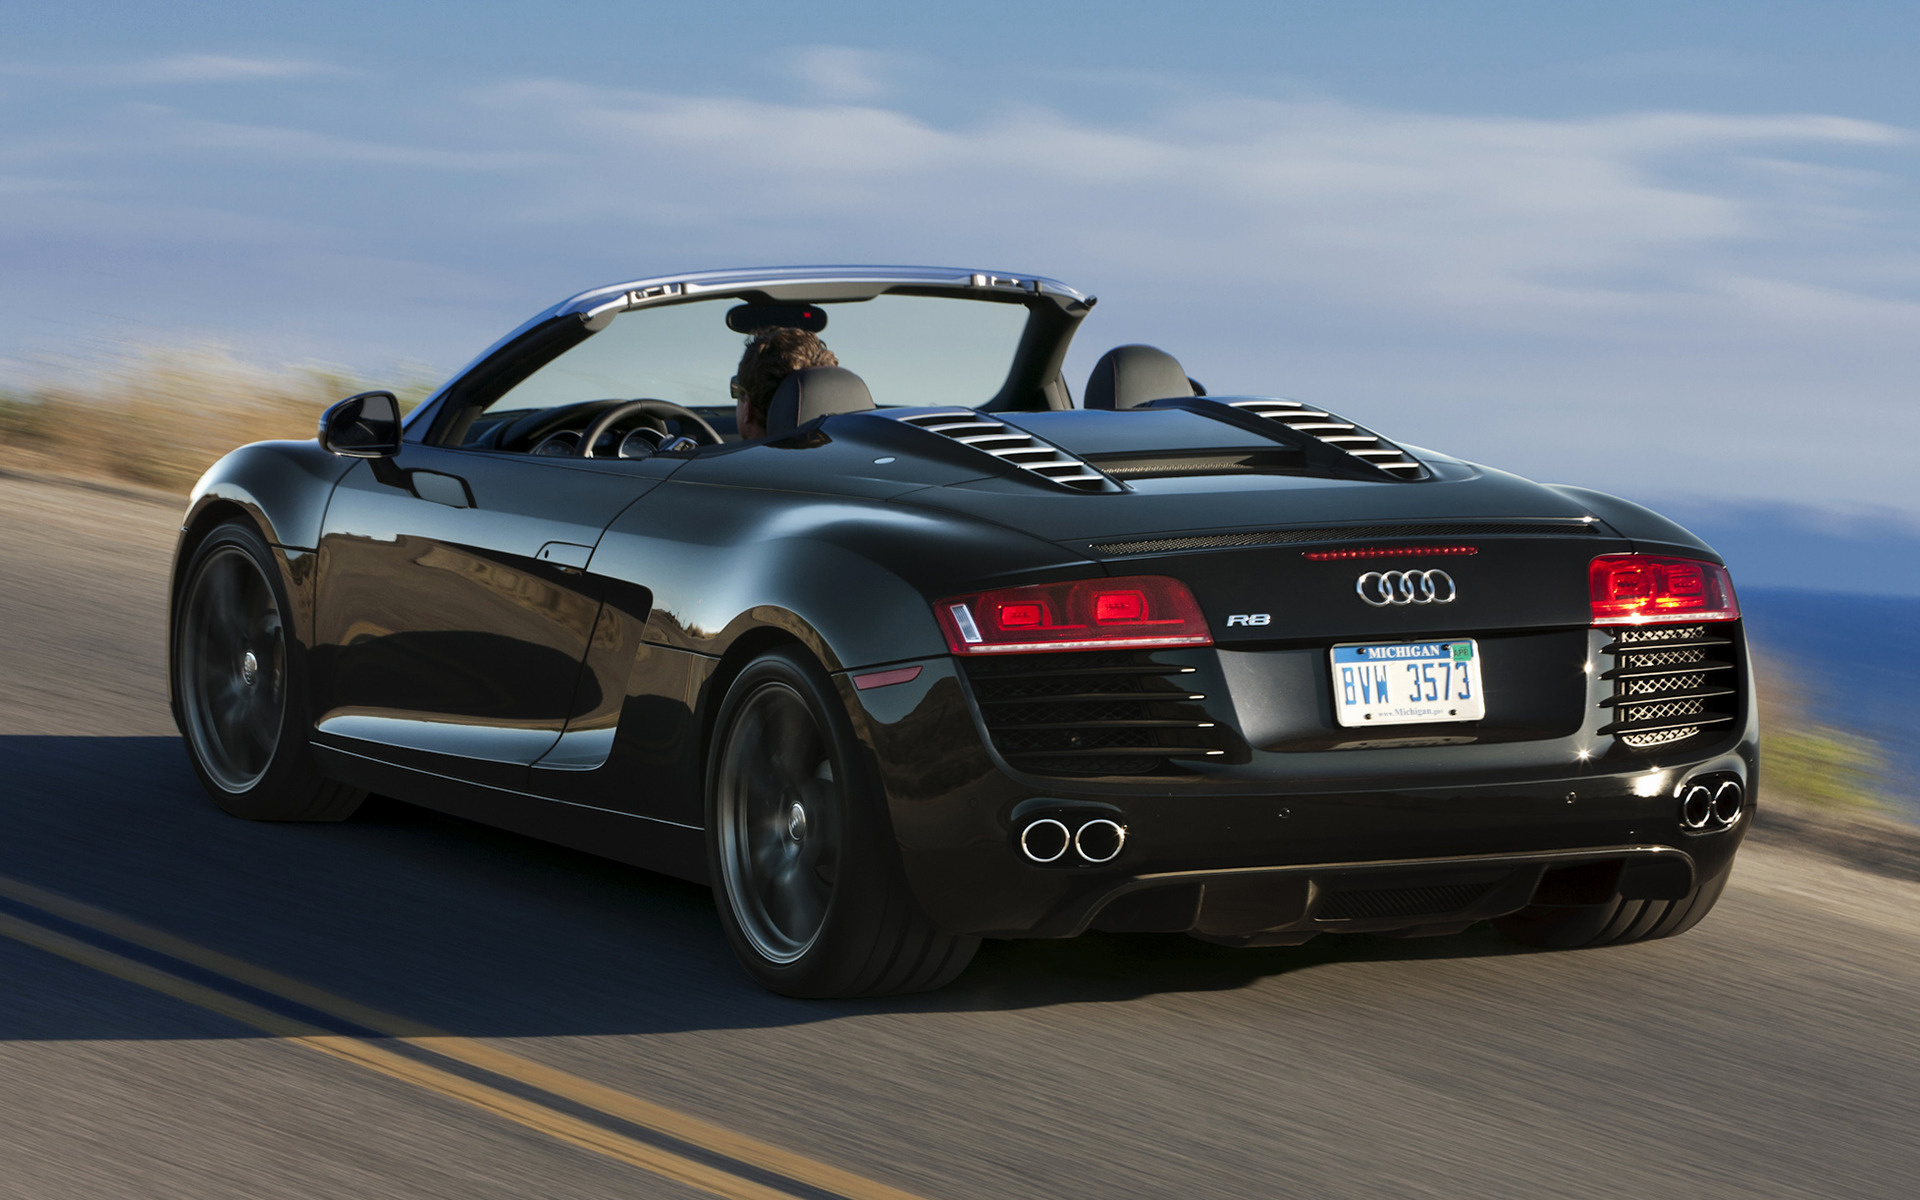 Audi R8 Spyder 2010 US Wallpapers and HD Images   Car Pixel